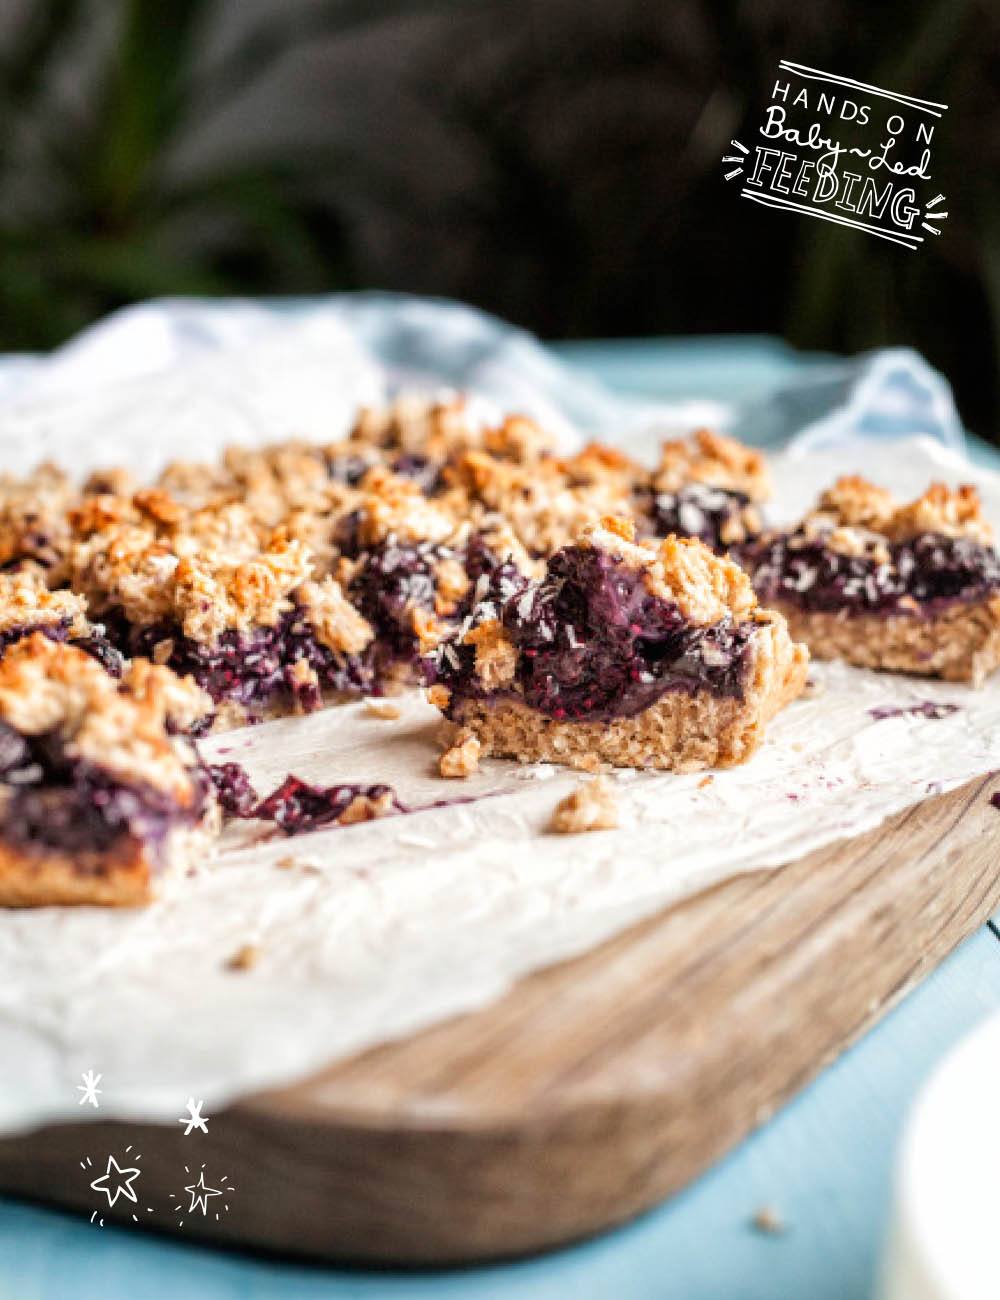 Baby Led Feeding Blueberry and Coconut Oat Bars Zoomed in Image of food. Aileen Cox Blundell Homemade Healthy baby food. Delicious baby led weaning recipe